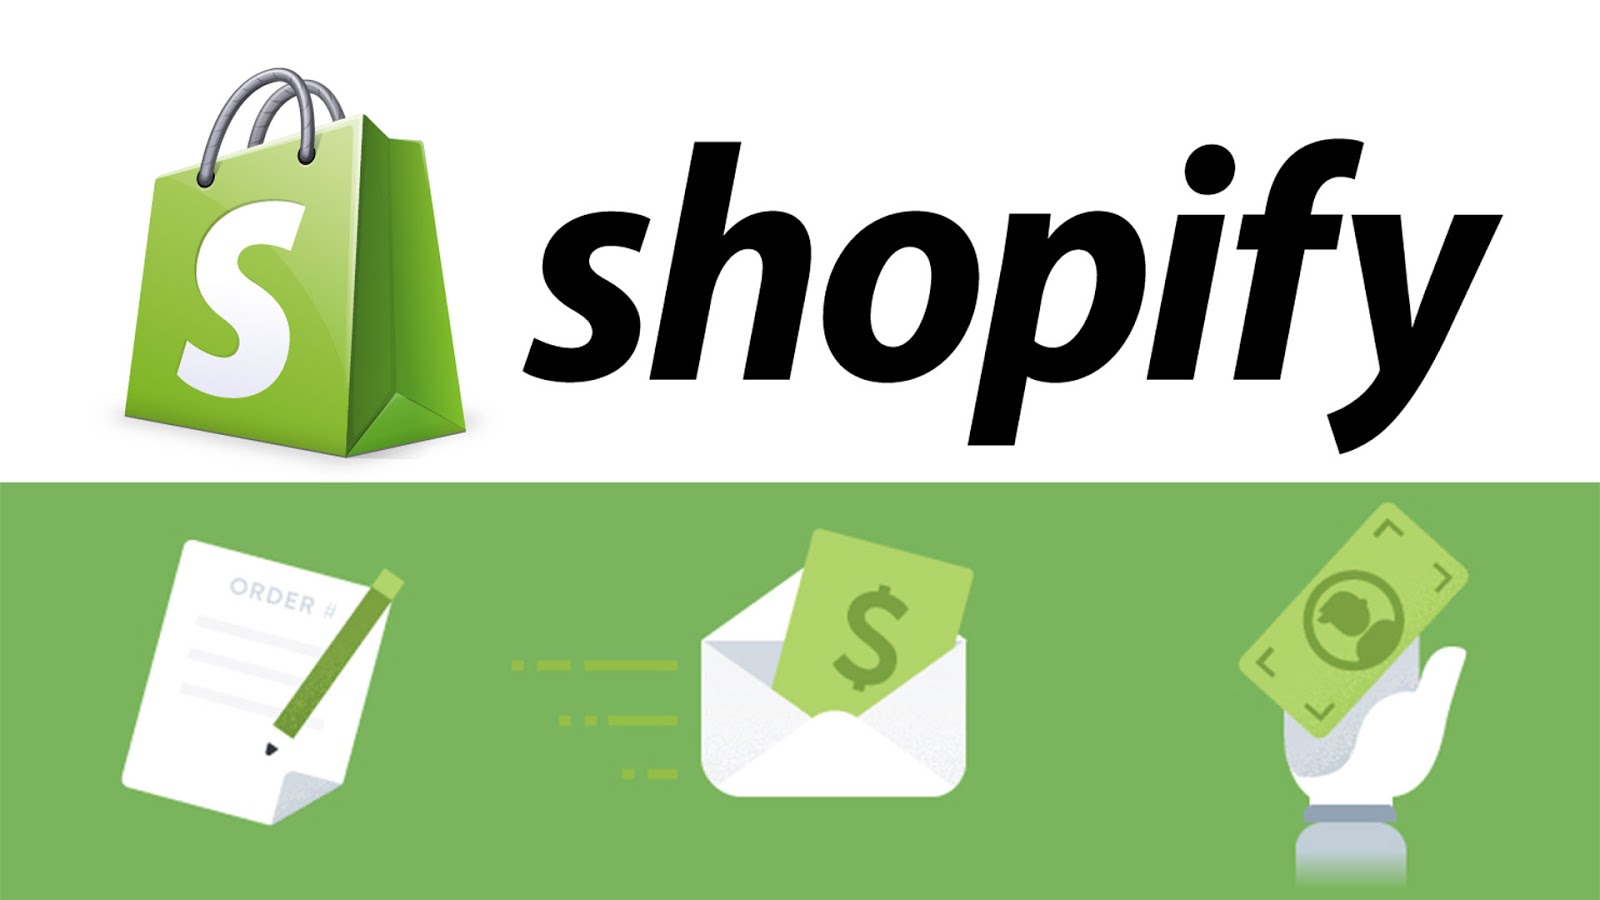 Duplicate your Shopify store into a test store where you can get free changes without negative consequences